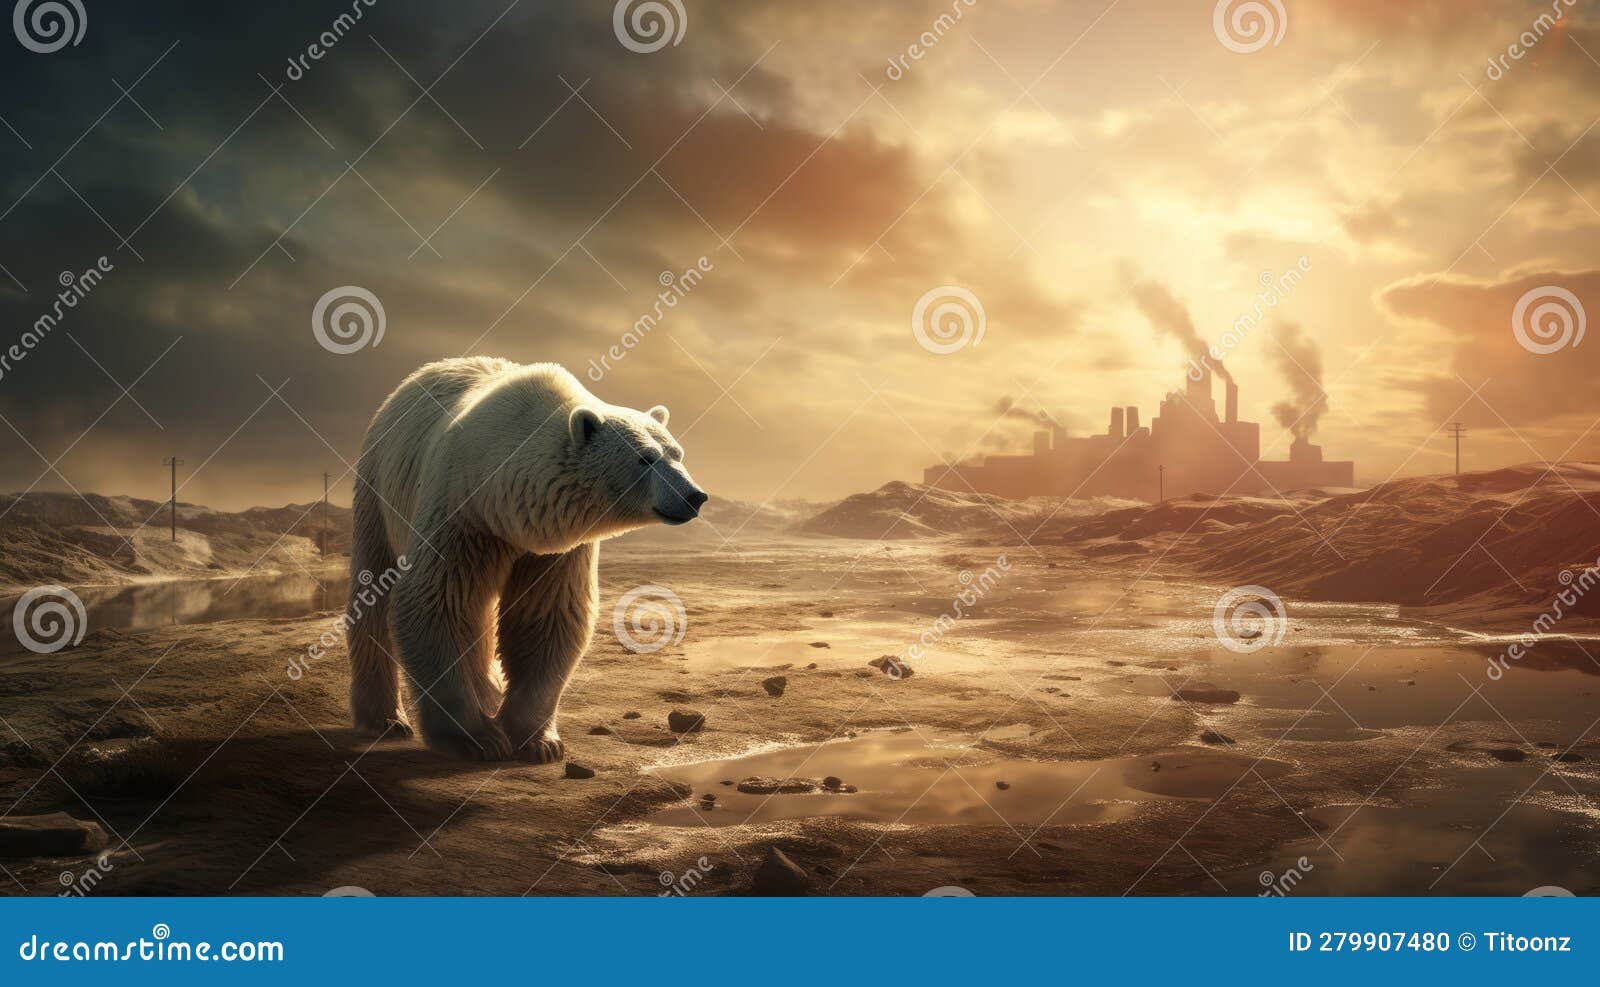 polar bear threatened by climate change, global warming and ice meltin